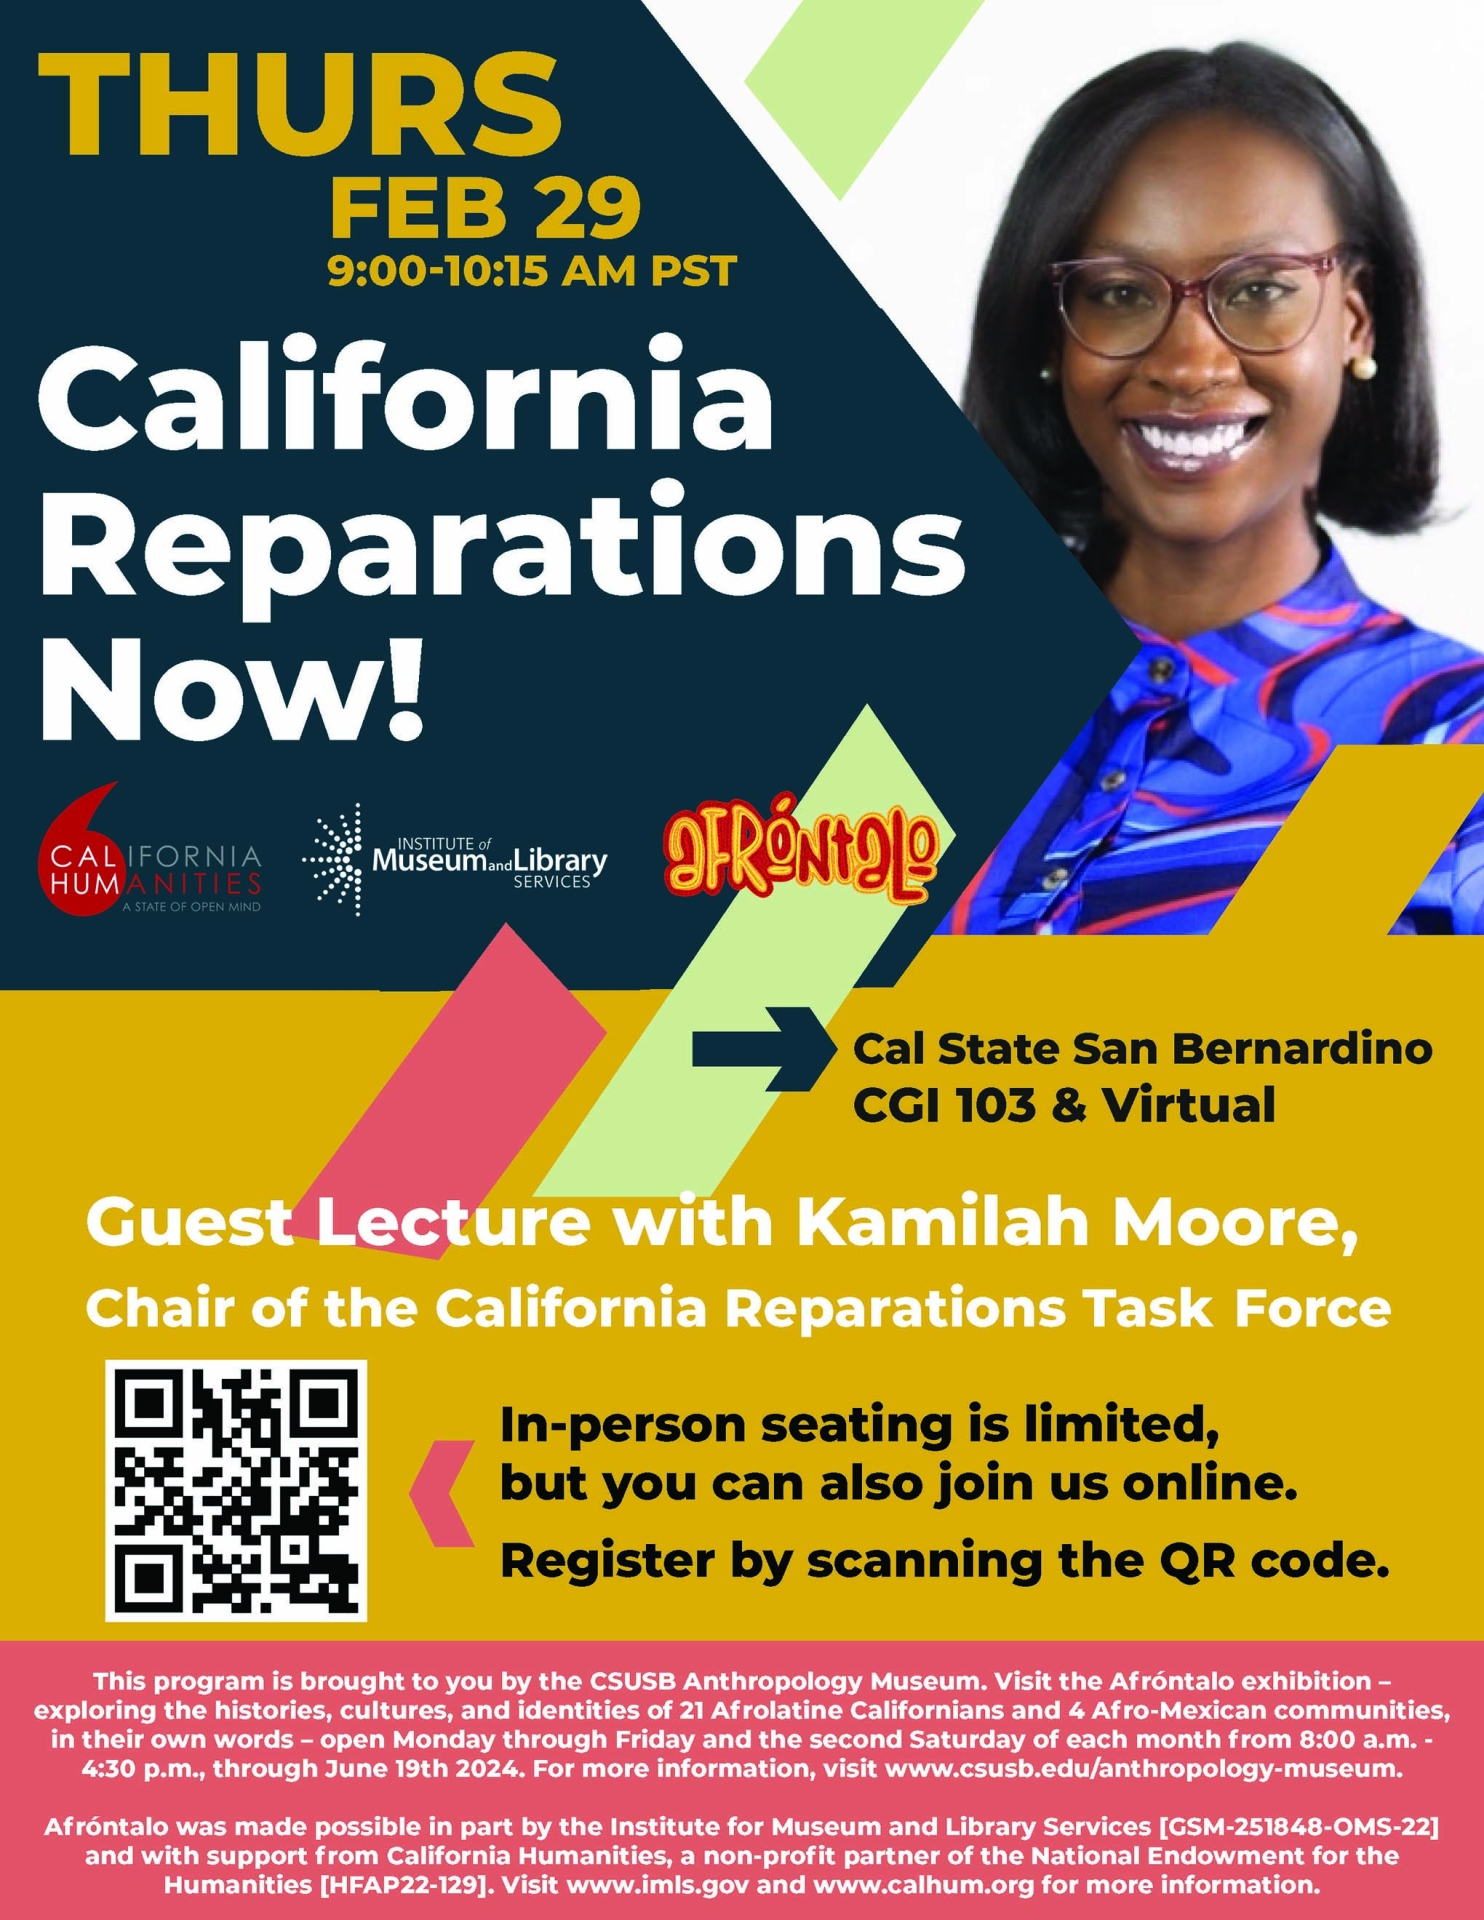 Kamilah Moore guest lecture flyer